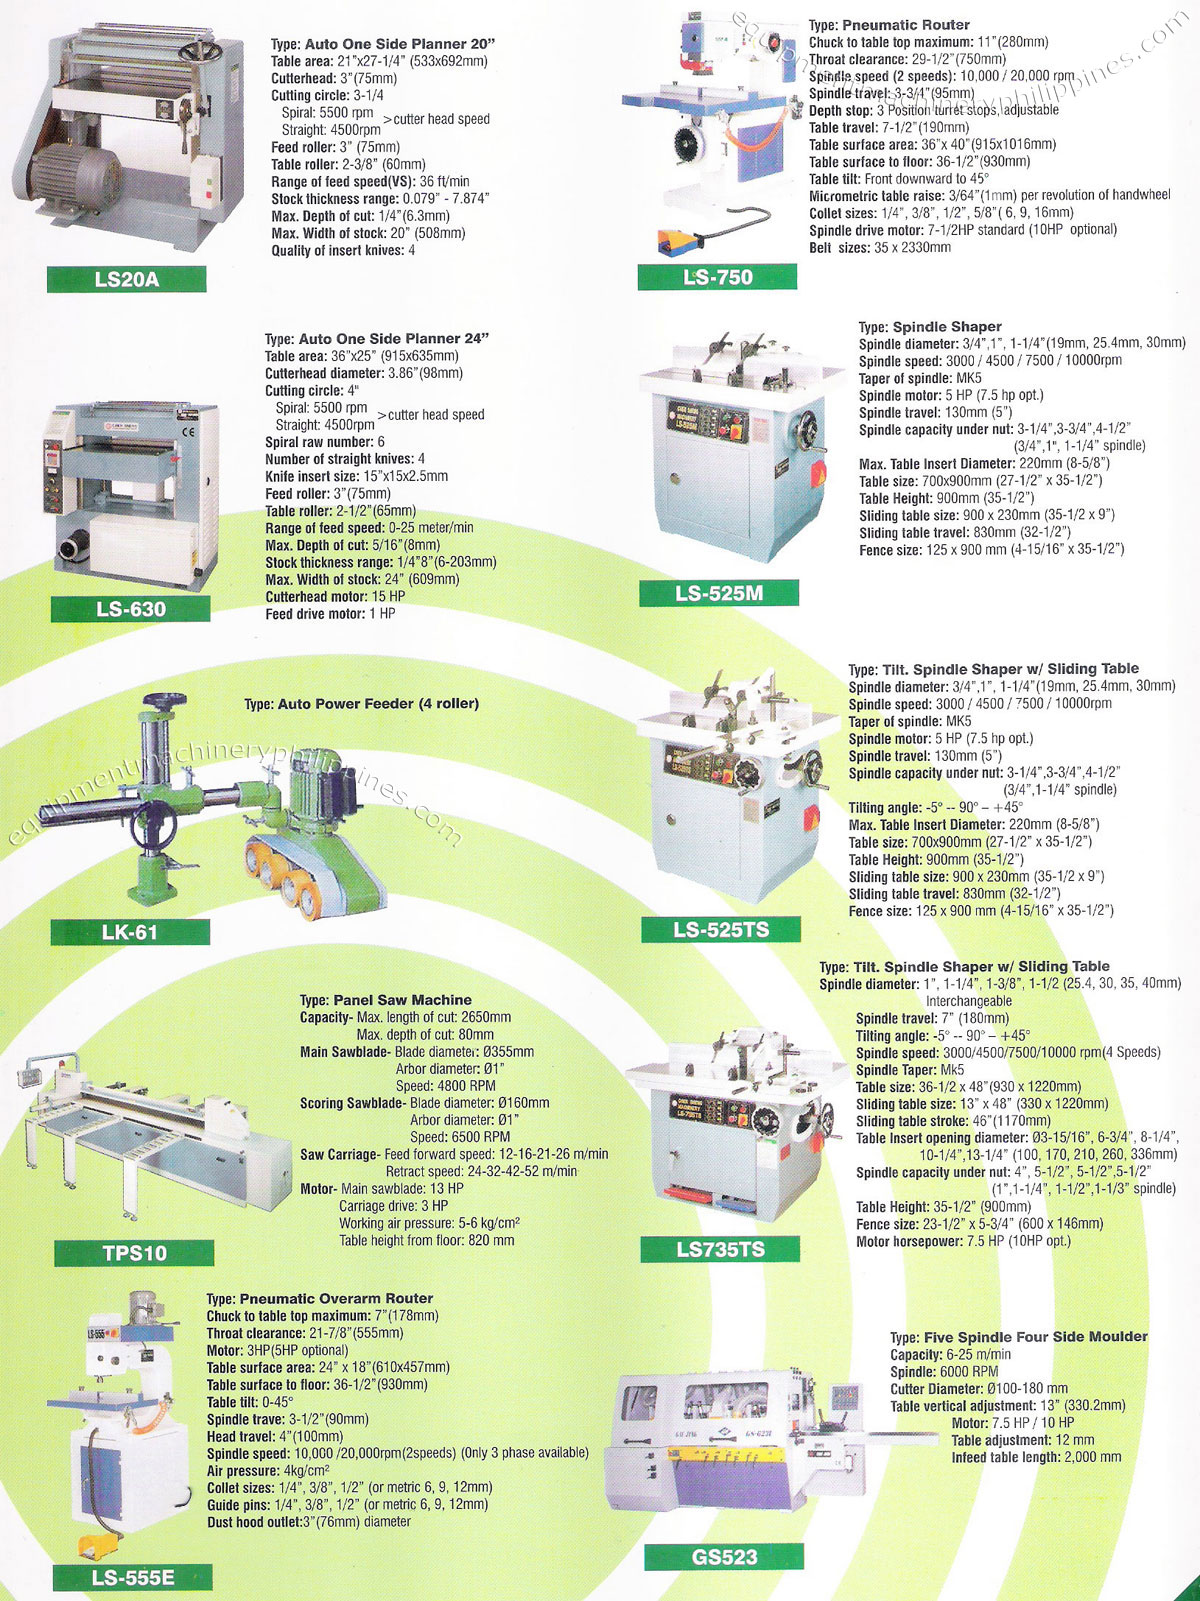 Planer, Pneumatic Router, Spindle Shaper, Auto Power Feeder, Panel Saw 